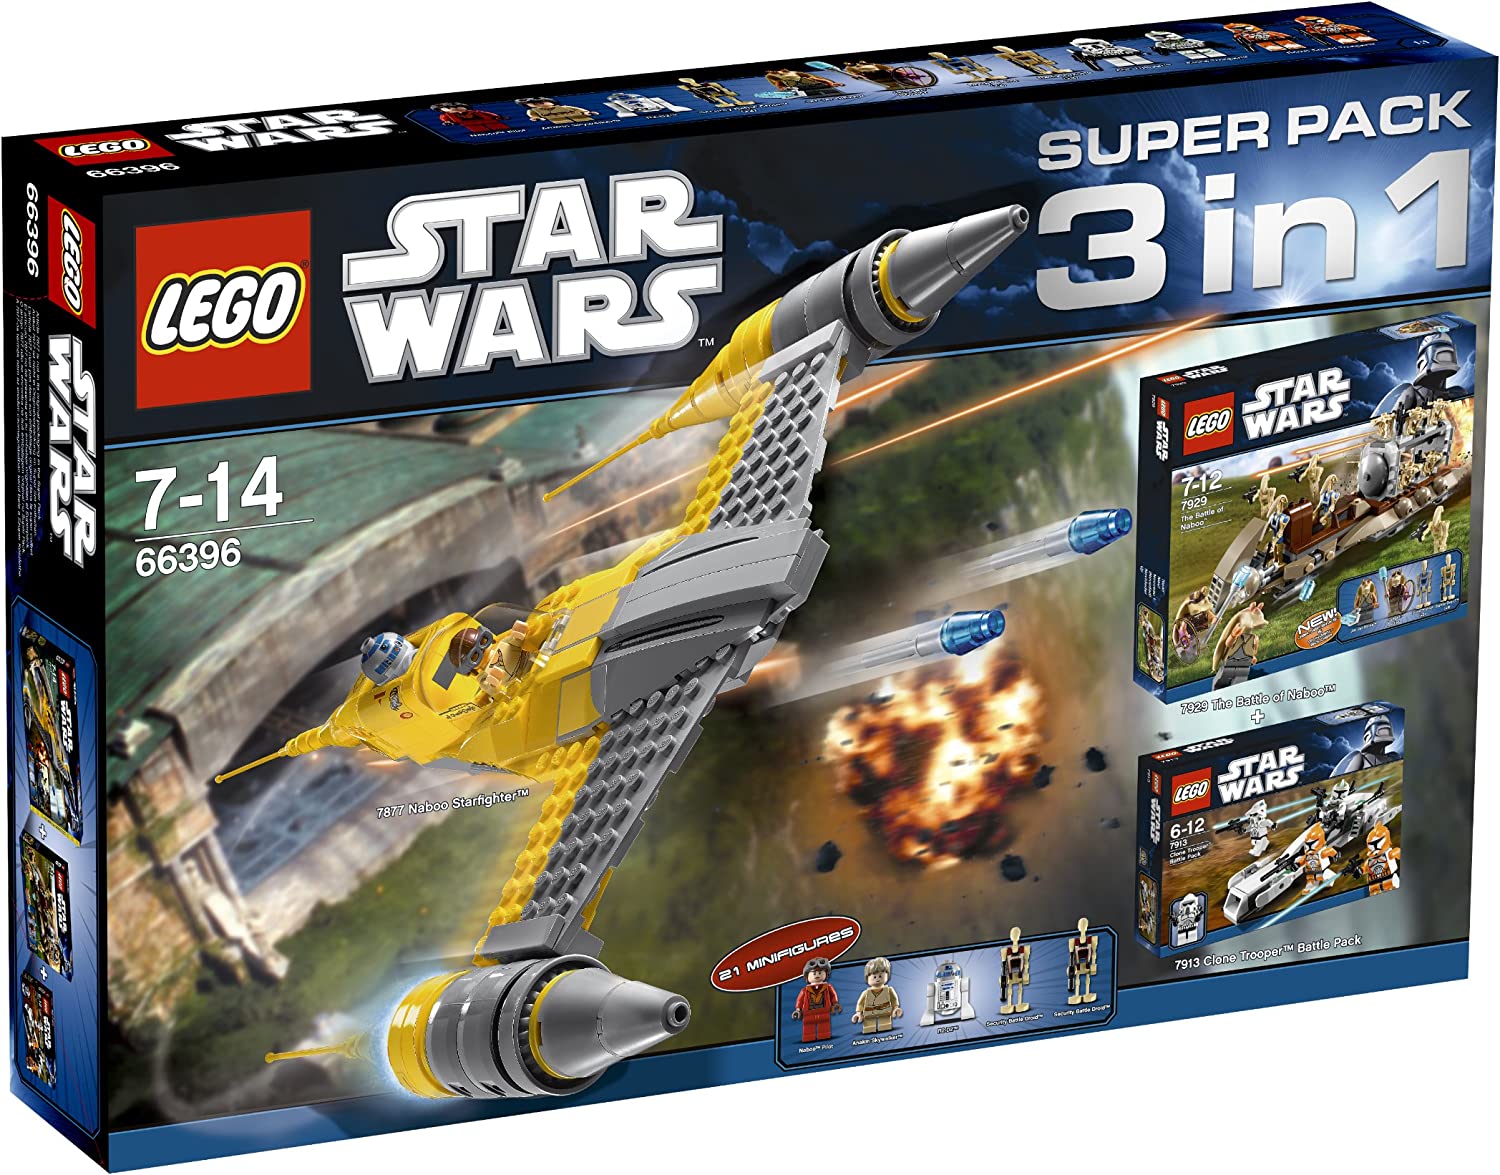 Lego Star Wars 66396 - Superpack 3 in 1